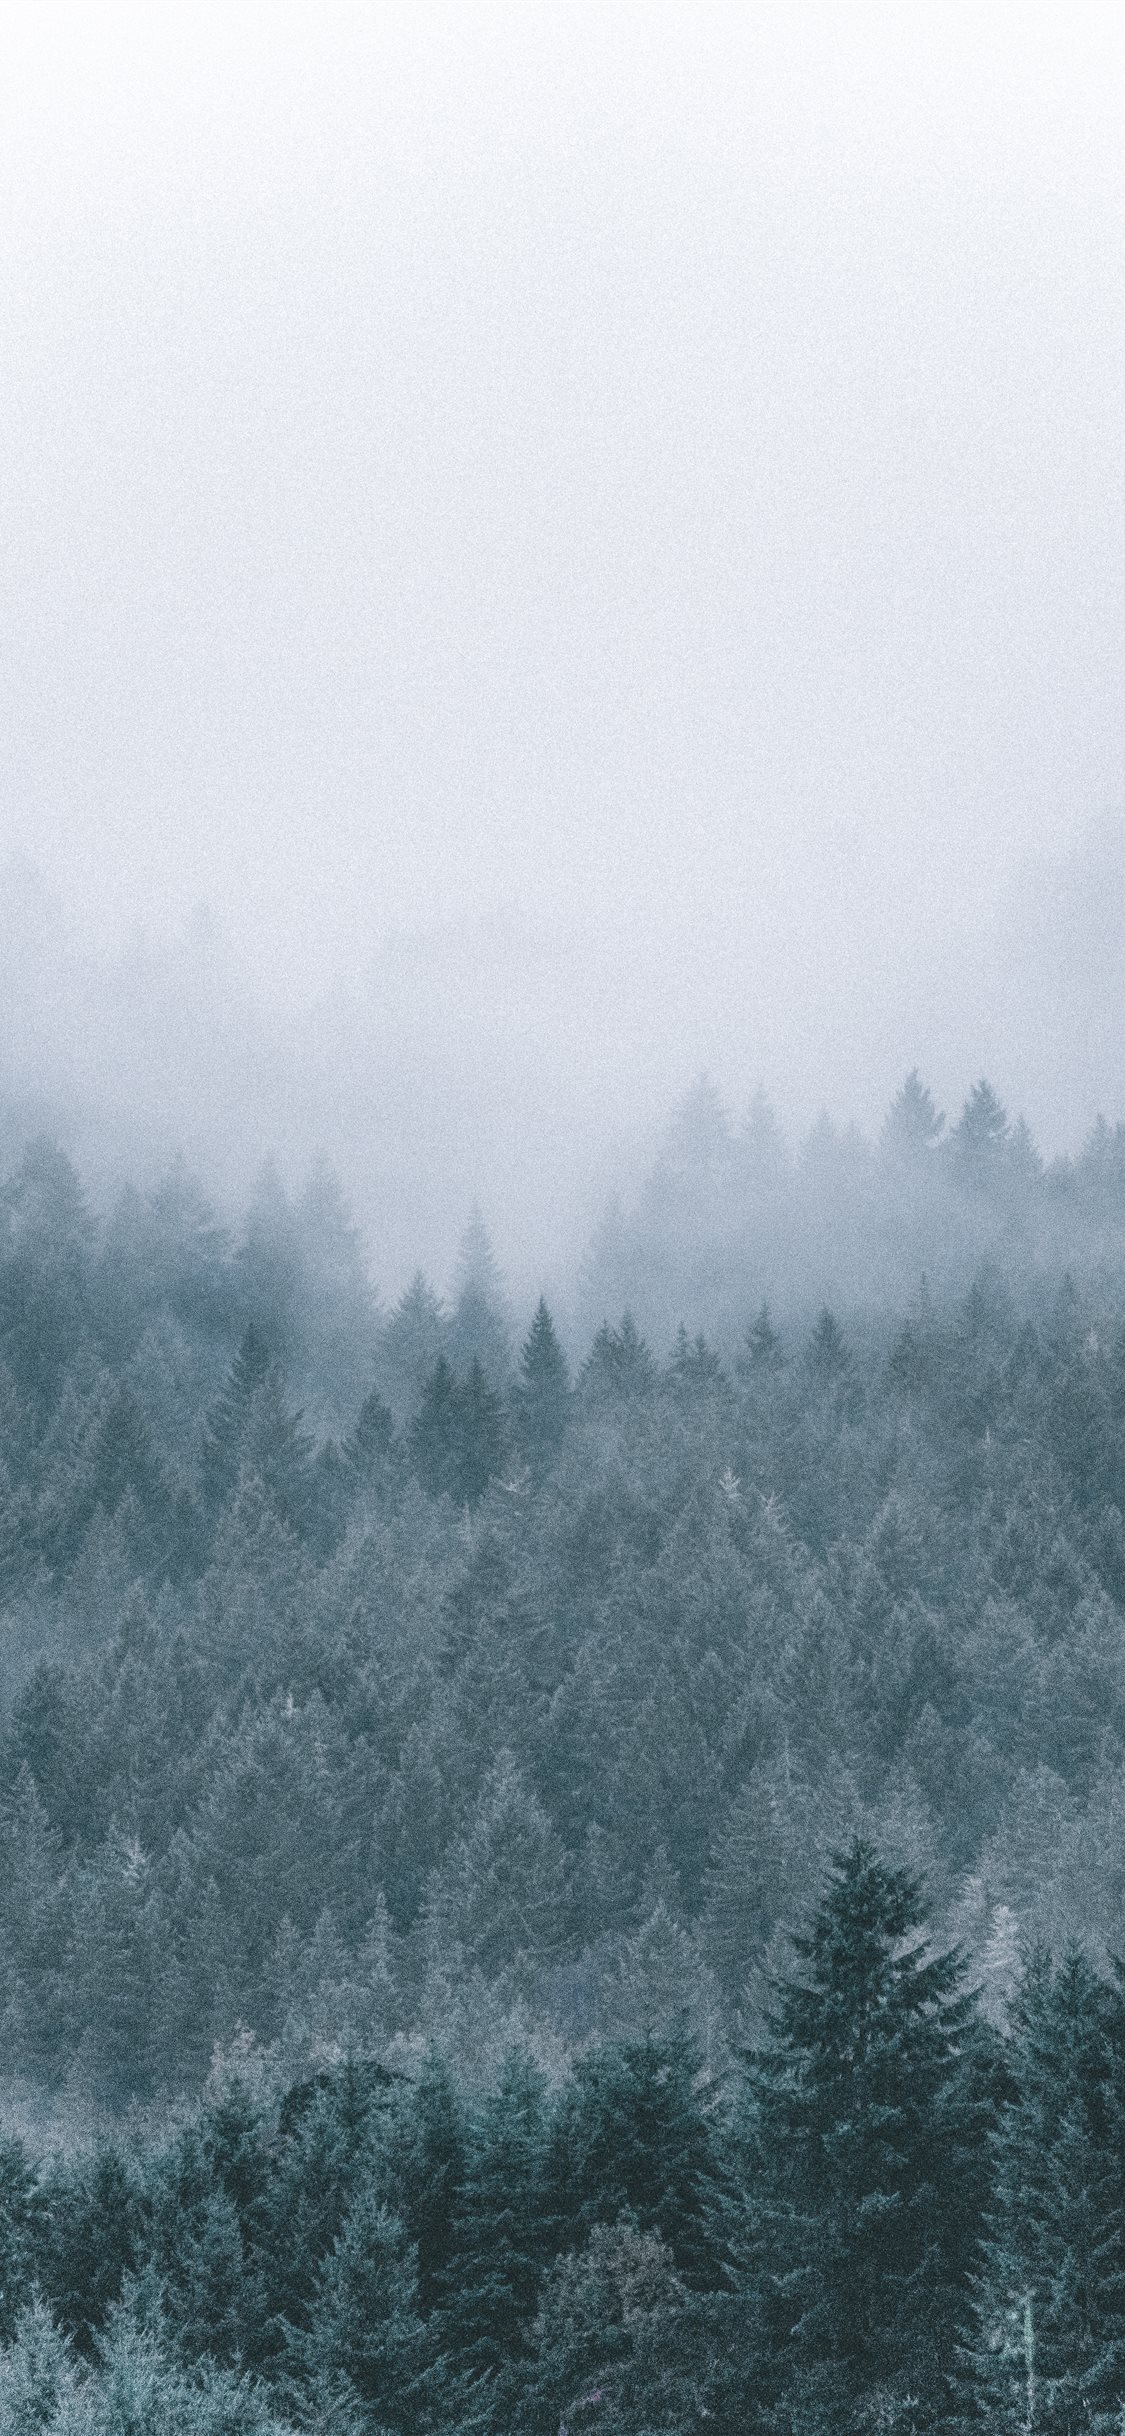 Foggy Icy Green Pine Trees Scenery Iphone X Wallpapers Free Download